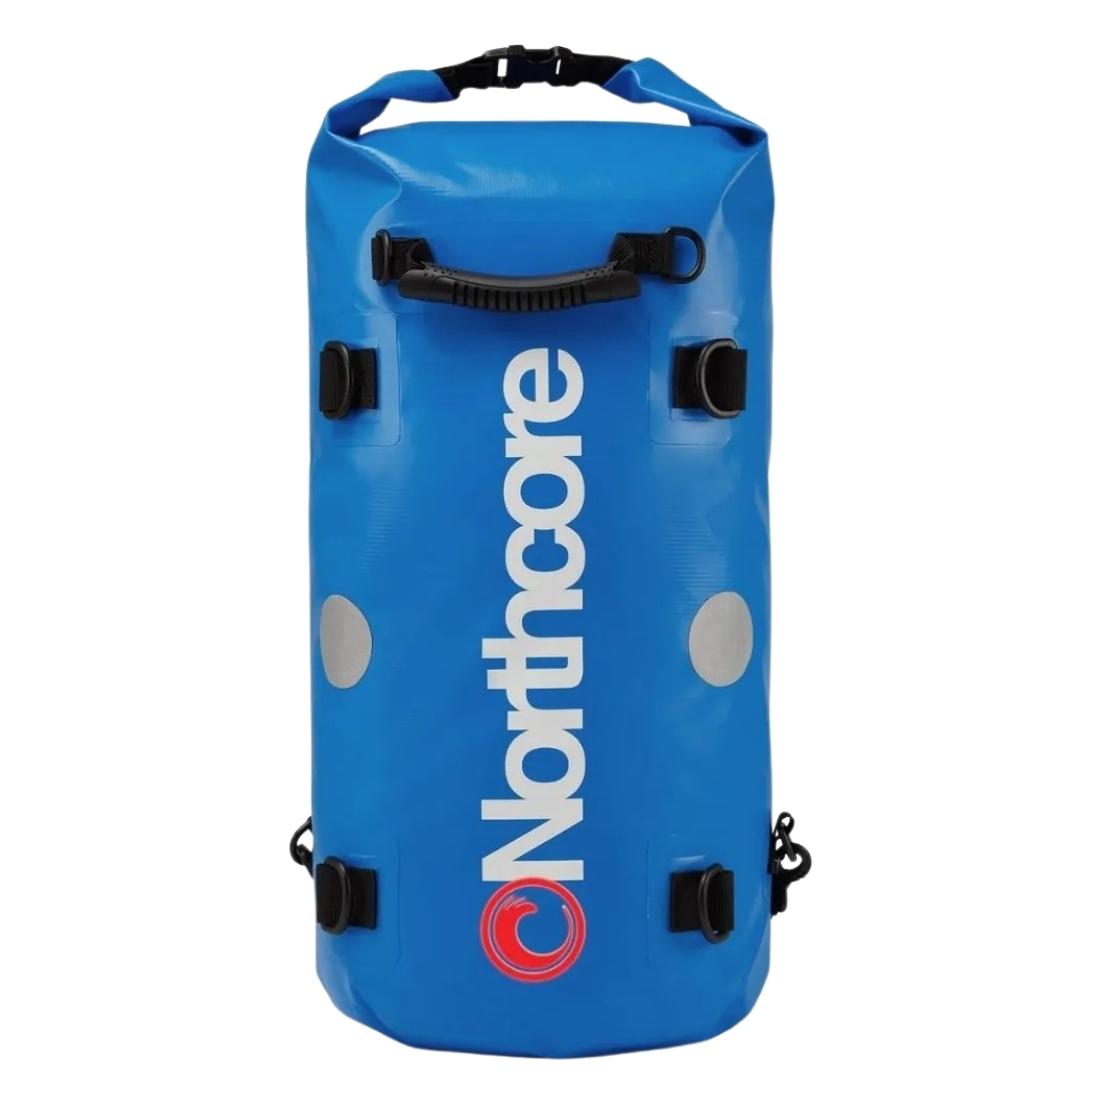 Northcore 30L Dry Bag Backpack - Blue - Wet/Dry Bag by Northcore 30L